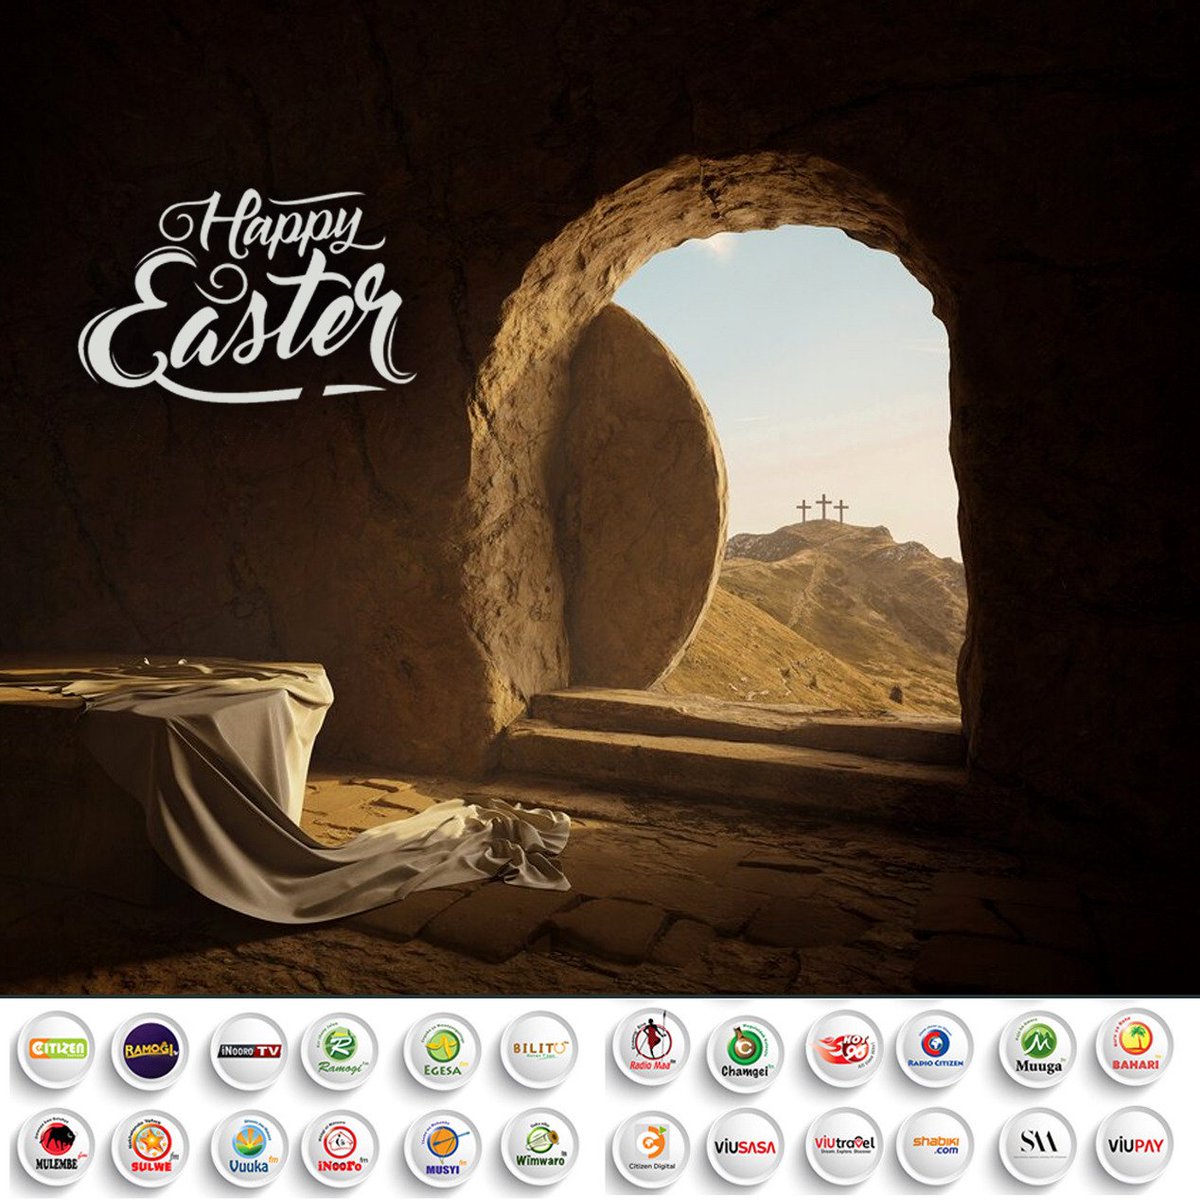 Royal Media Services wishes you a season filled with peace and joy . Happy Easter